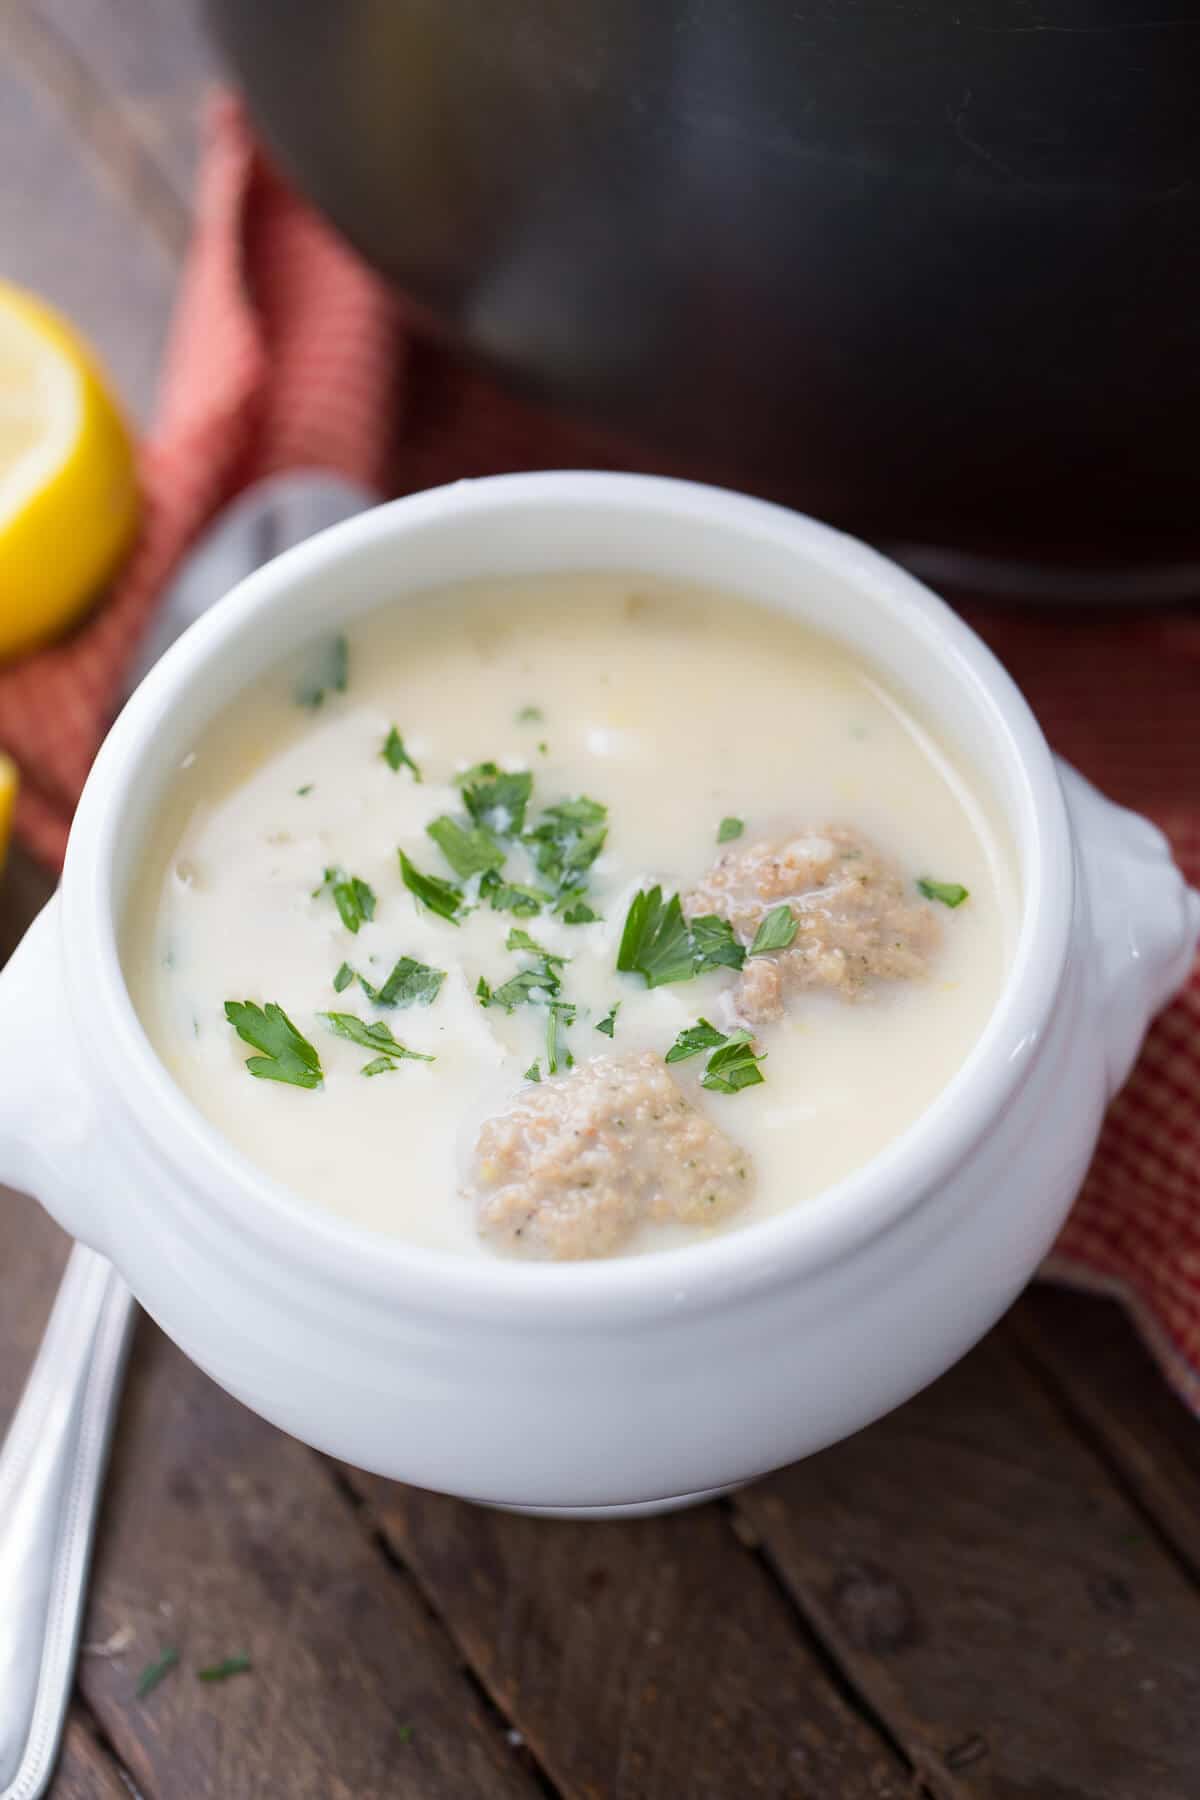 Avgolemono is a Greek lemon soup that is the simplest soup you'll ever make. It's so simple yet so satisfying!